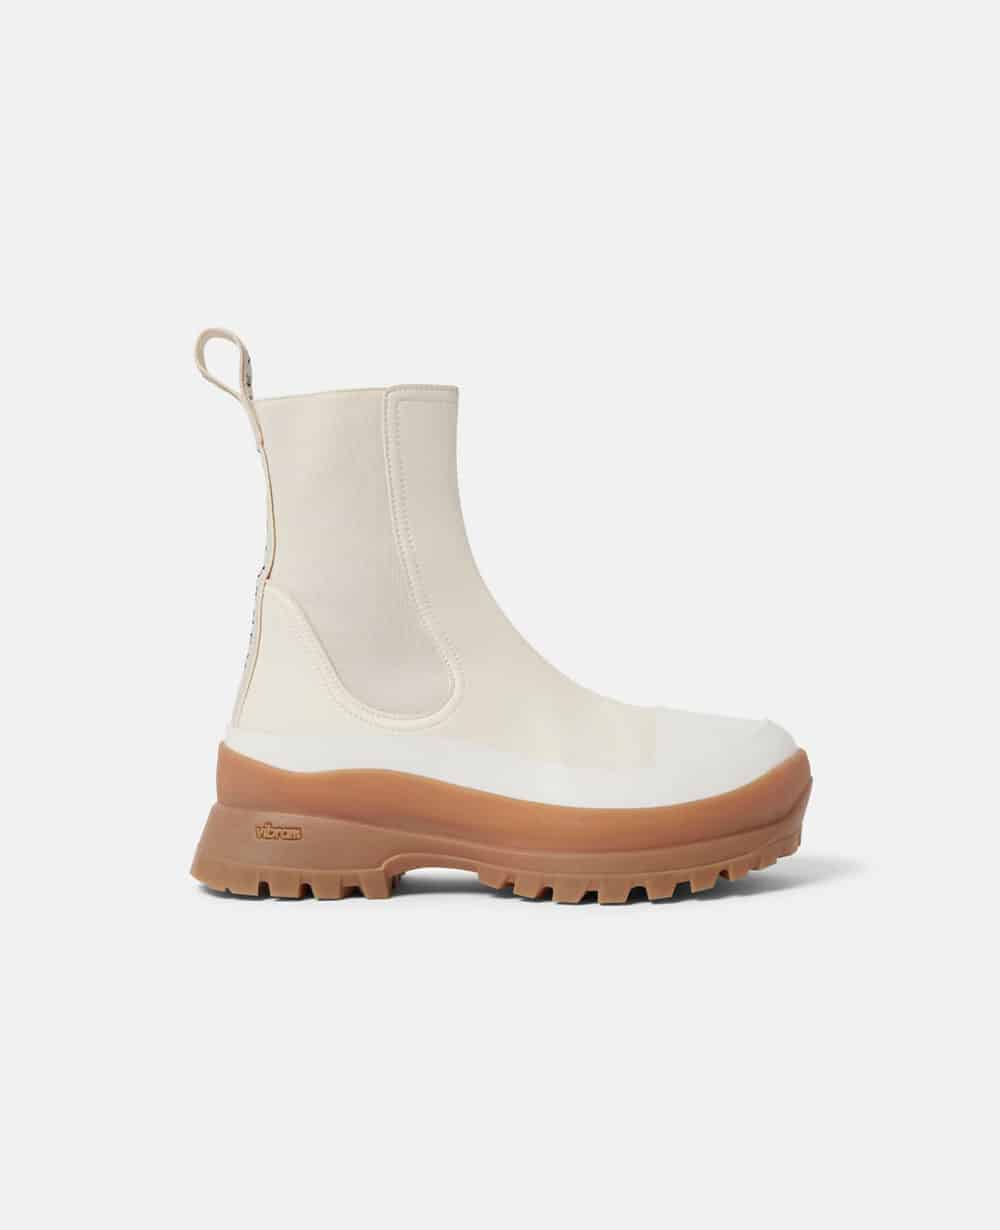 Cream vegan Chelsea boots with brown sole from Stella McCartney